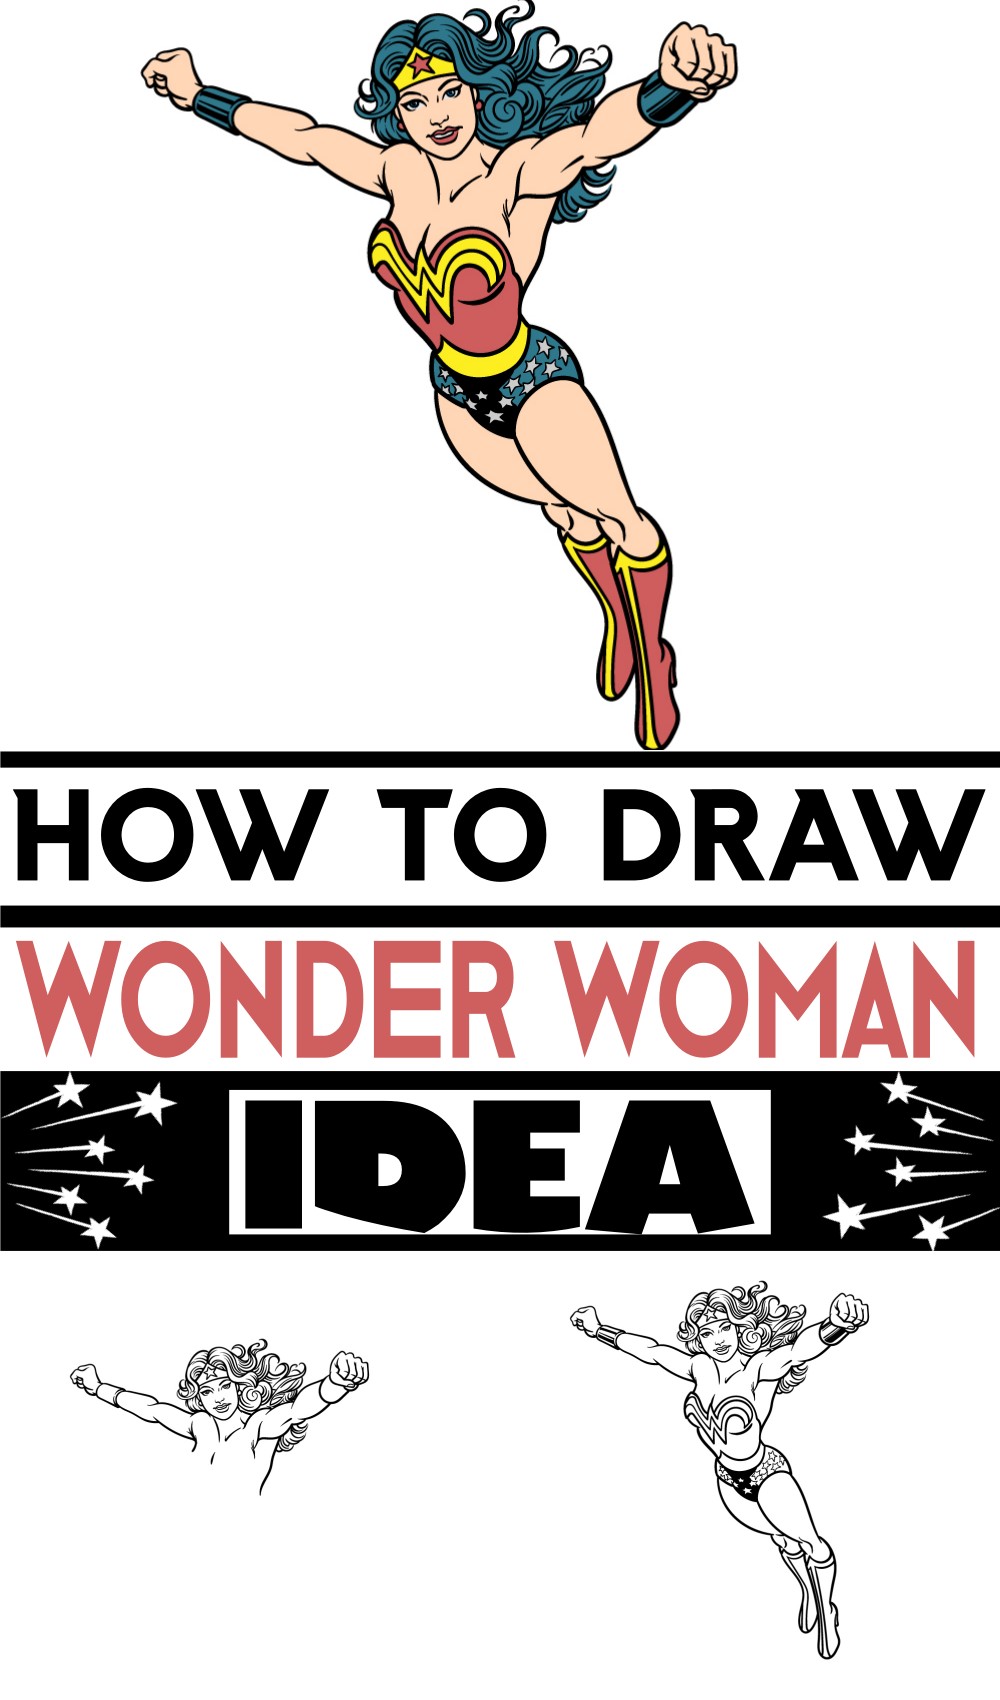 How To Draw Wonder Woman